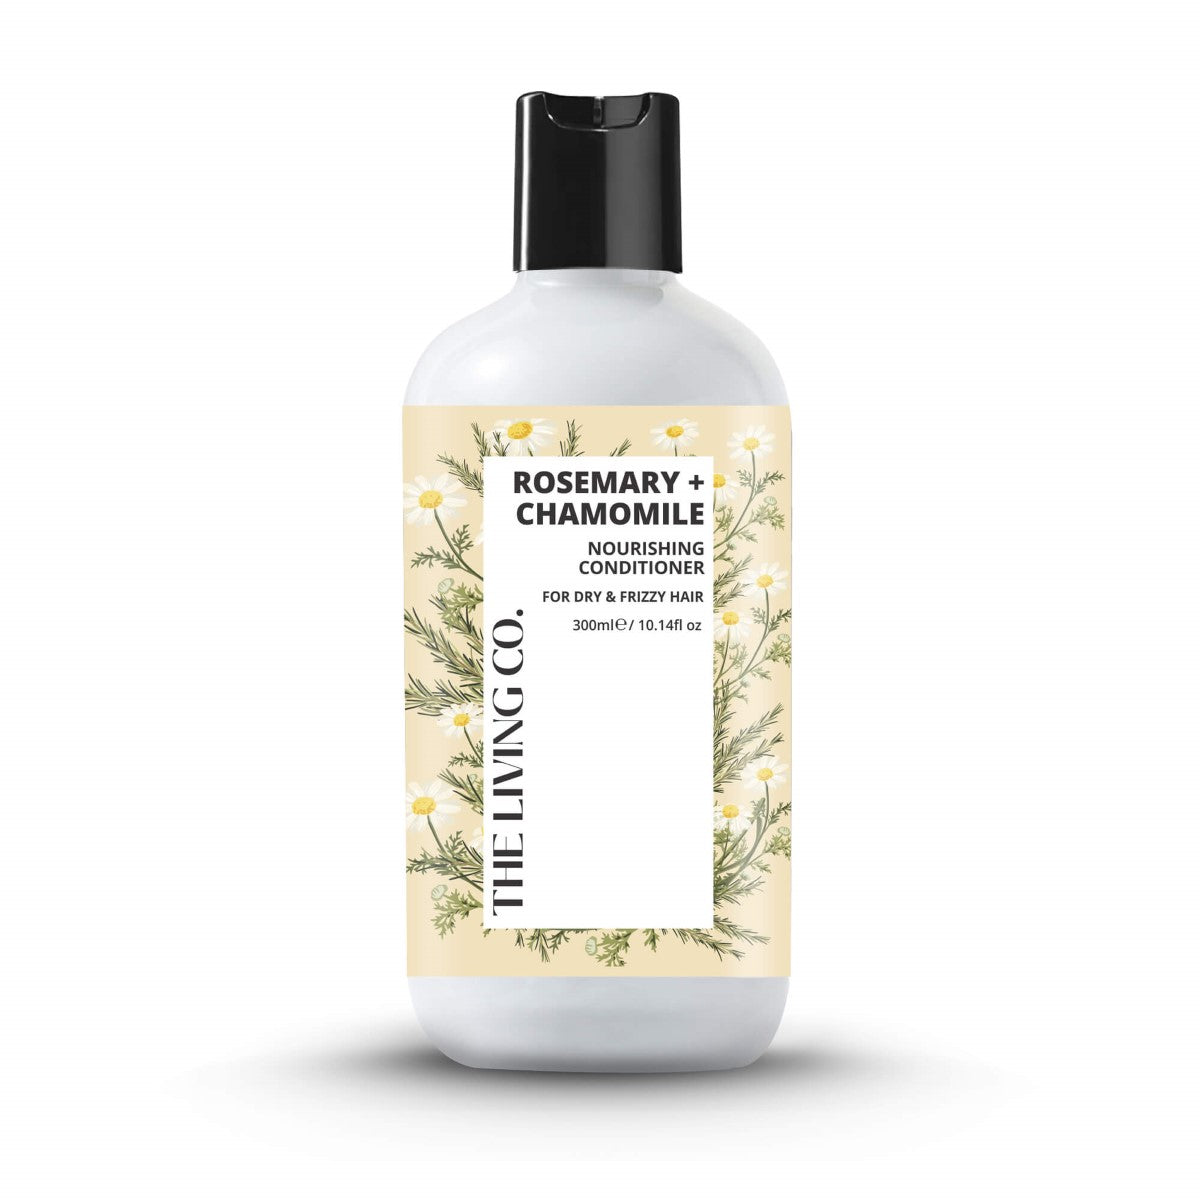 Nourishing Conditioner With Rosemary + Chamomile